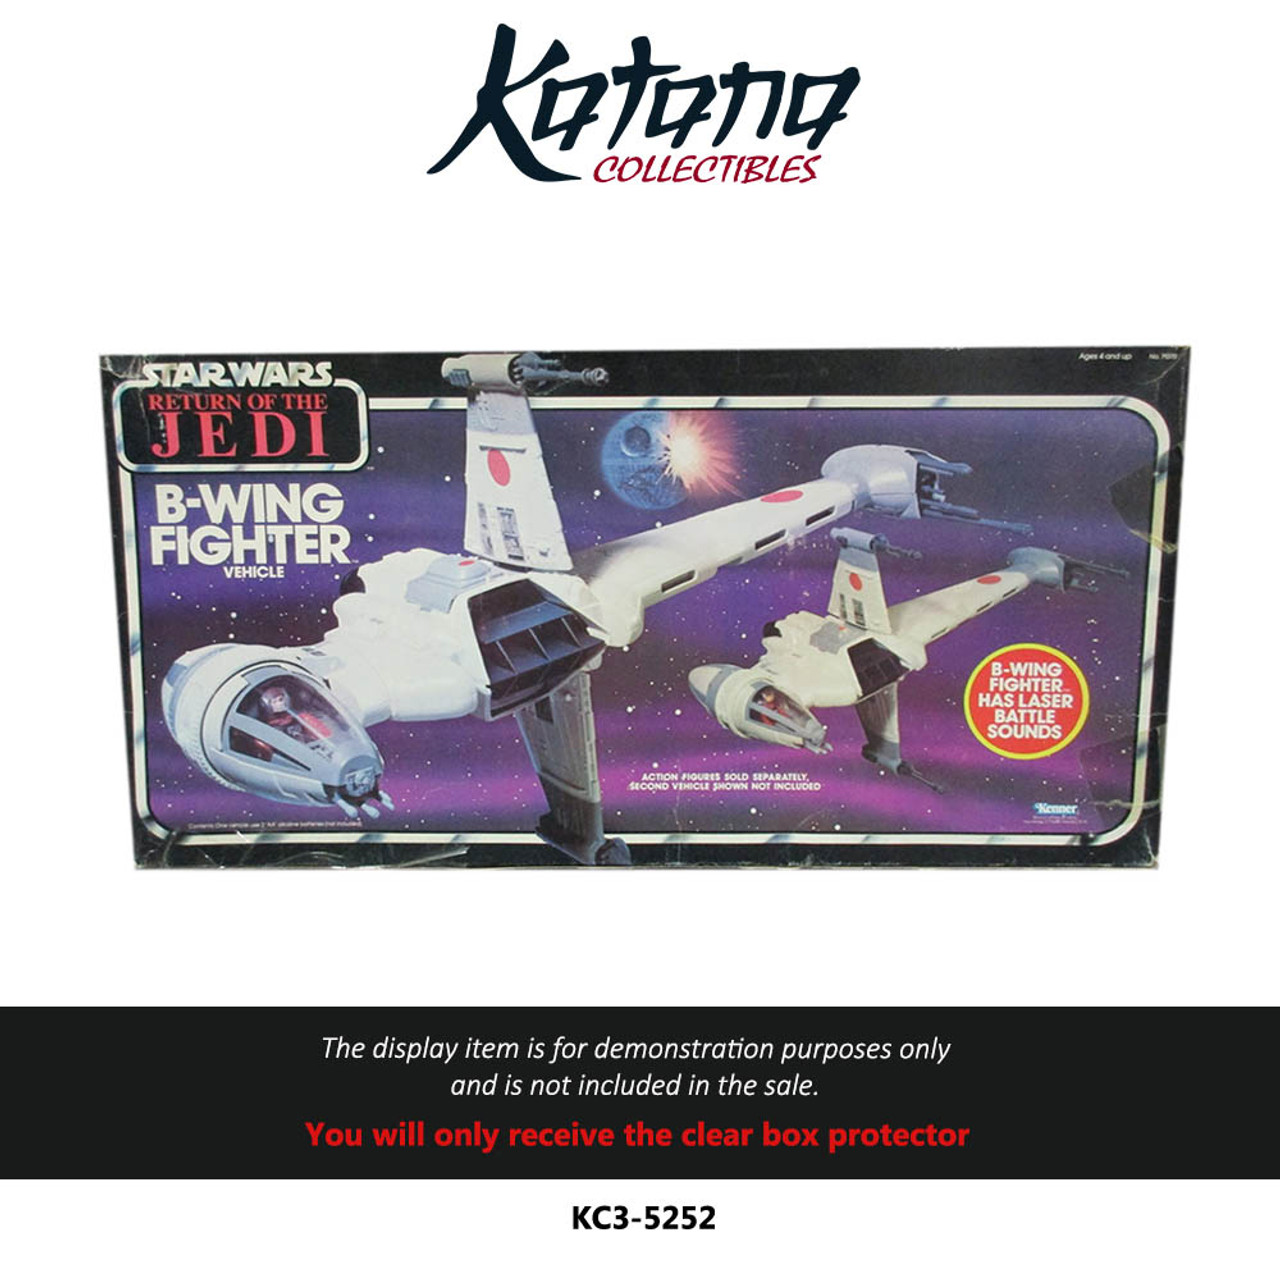 Katana Collectibles Protector For Vintage B-Wing Fighter